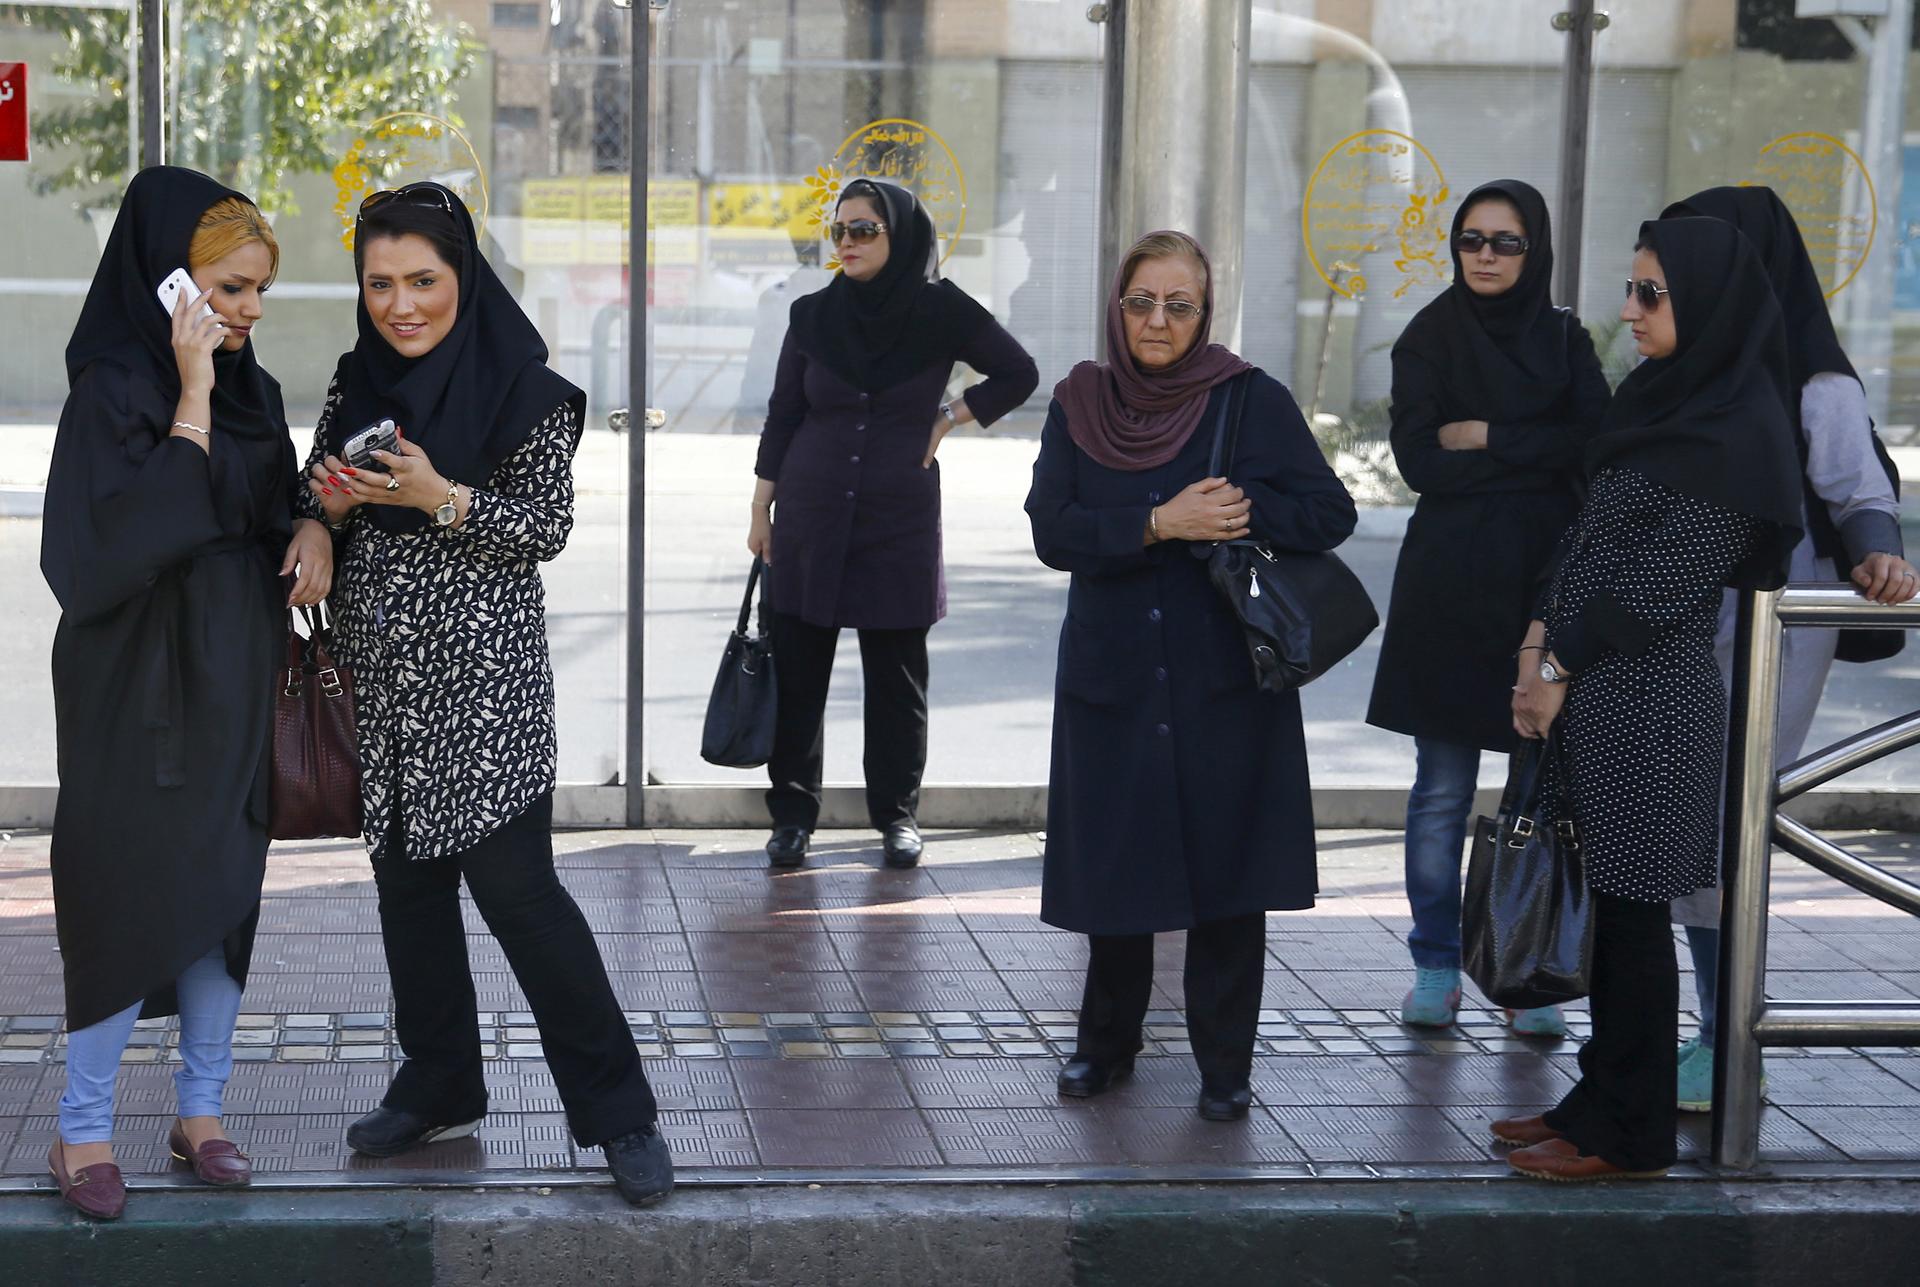 Women wait for a bus in central Tehran, Iran August 24, 2015.